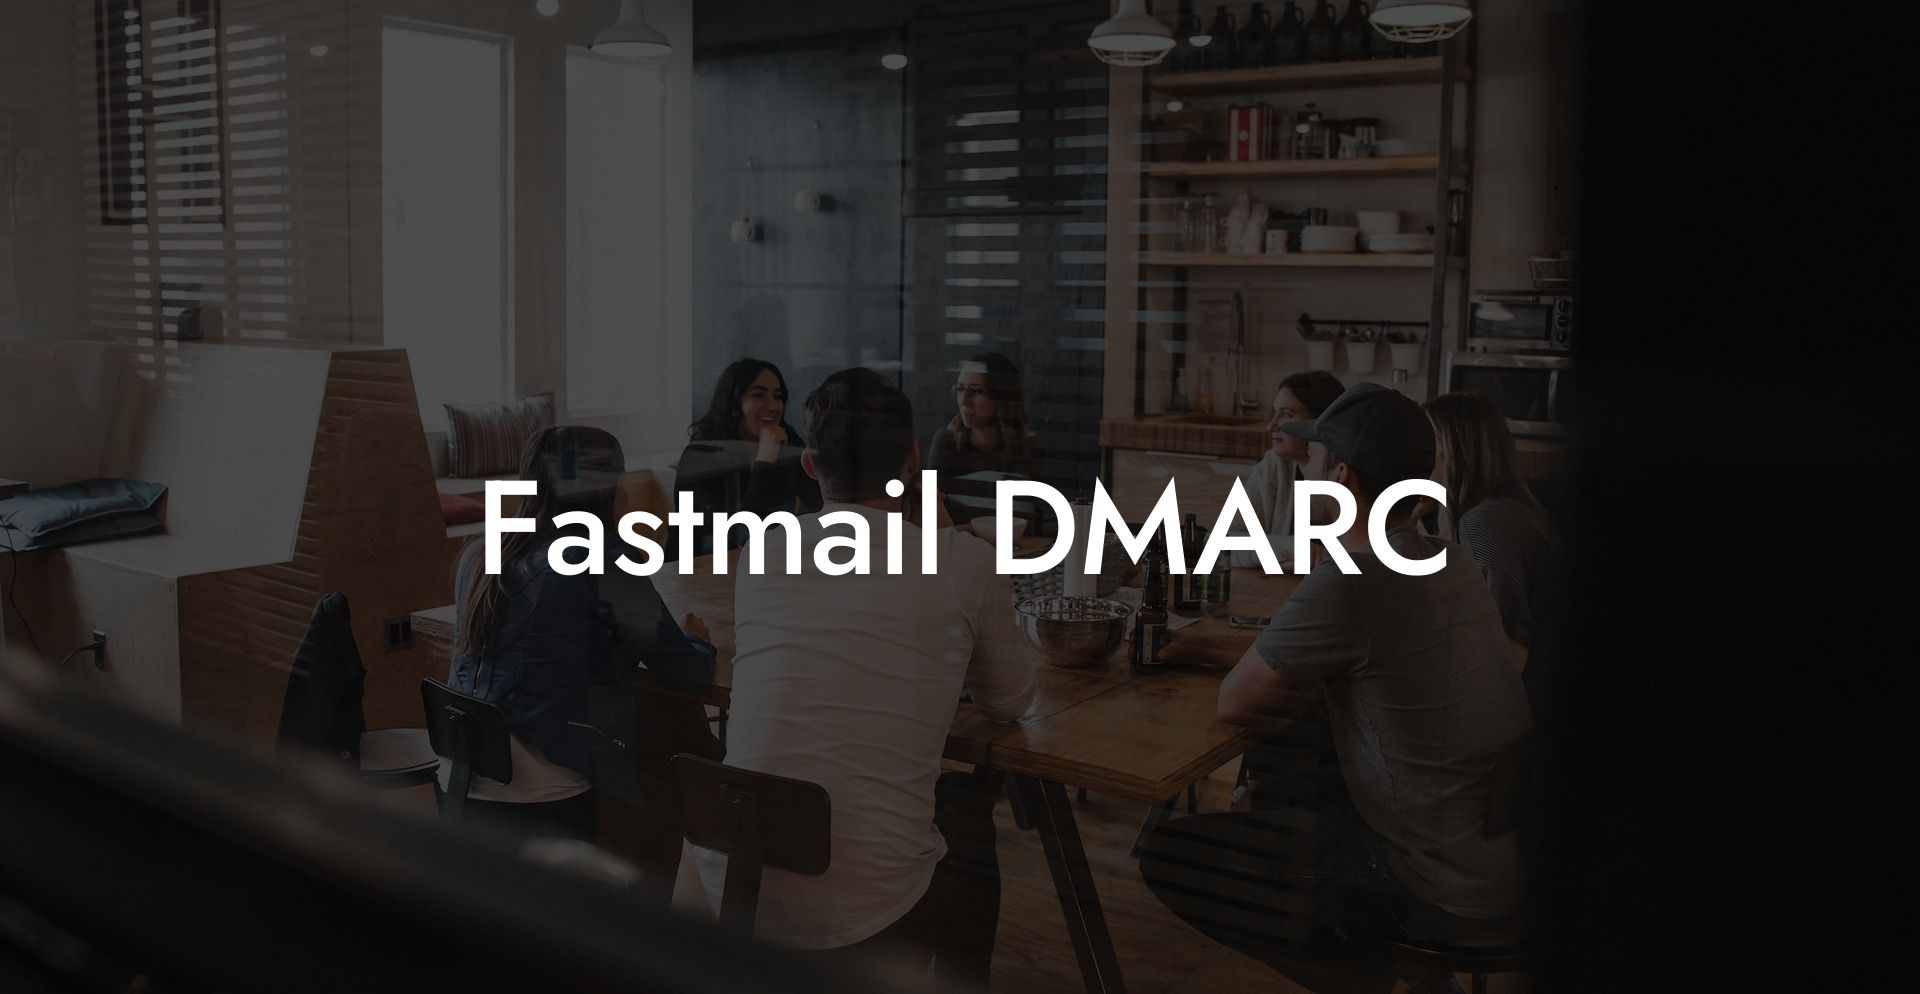 Fastmail DMARC